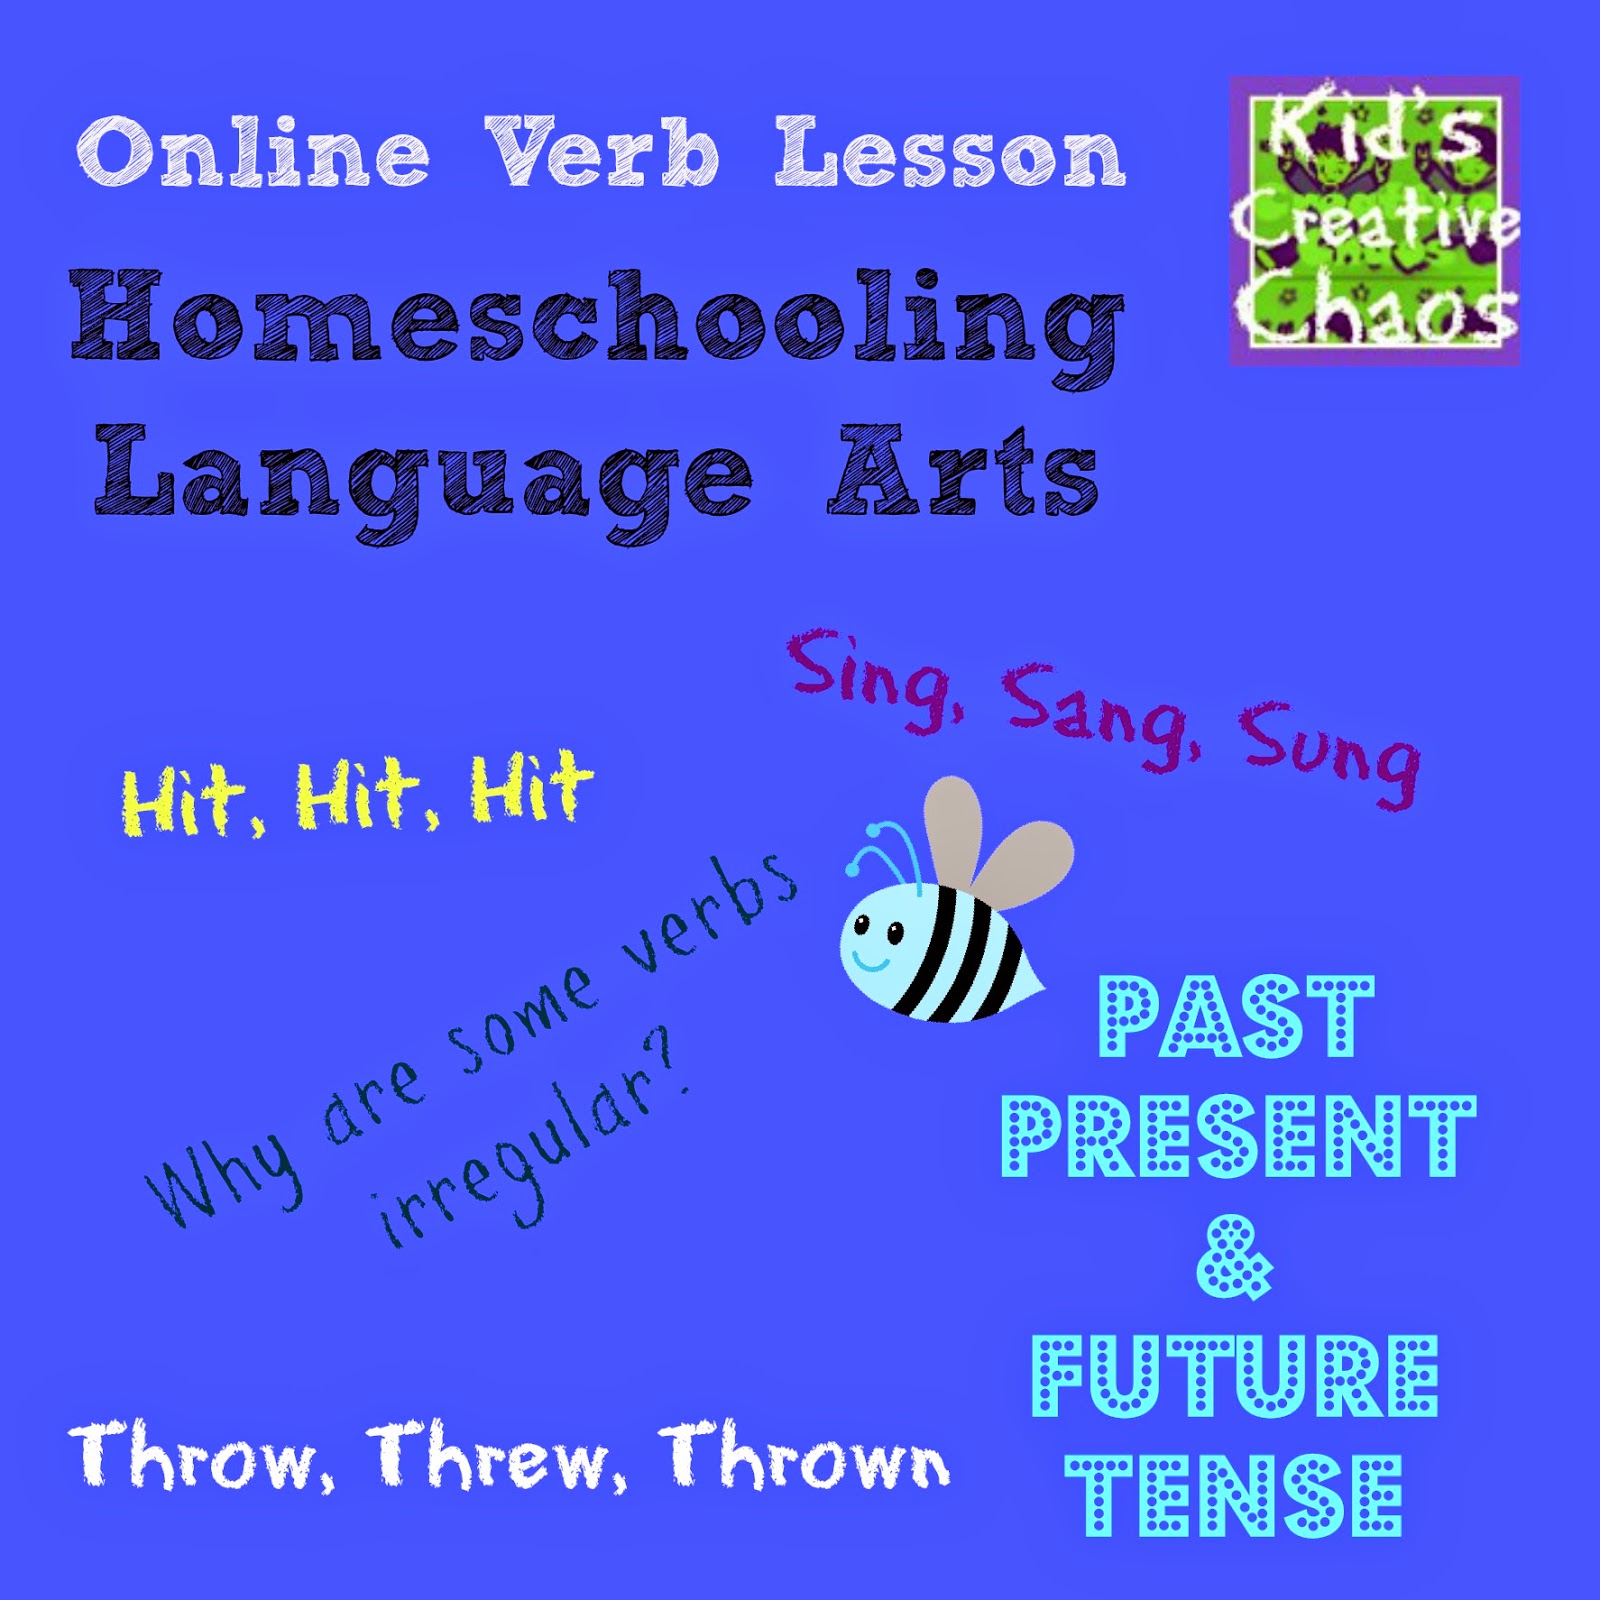 English Verb Conjugation Practice Lesson For Homeschool Kids Creative Chaos